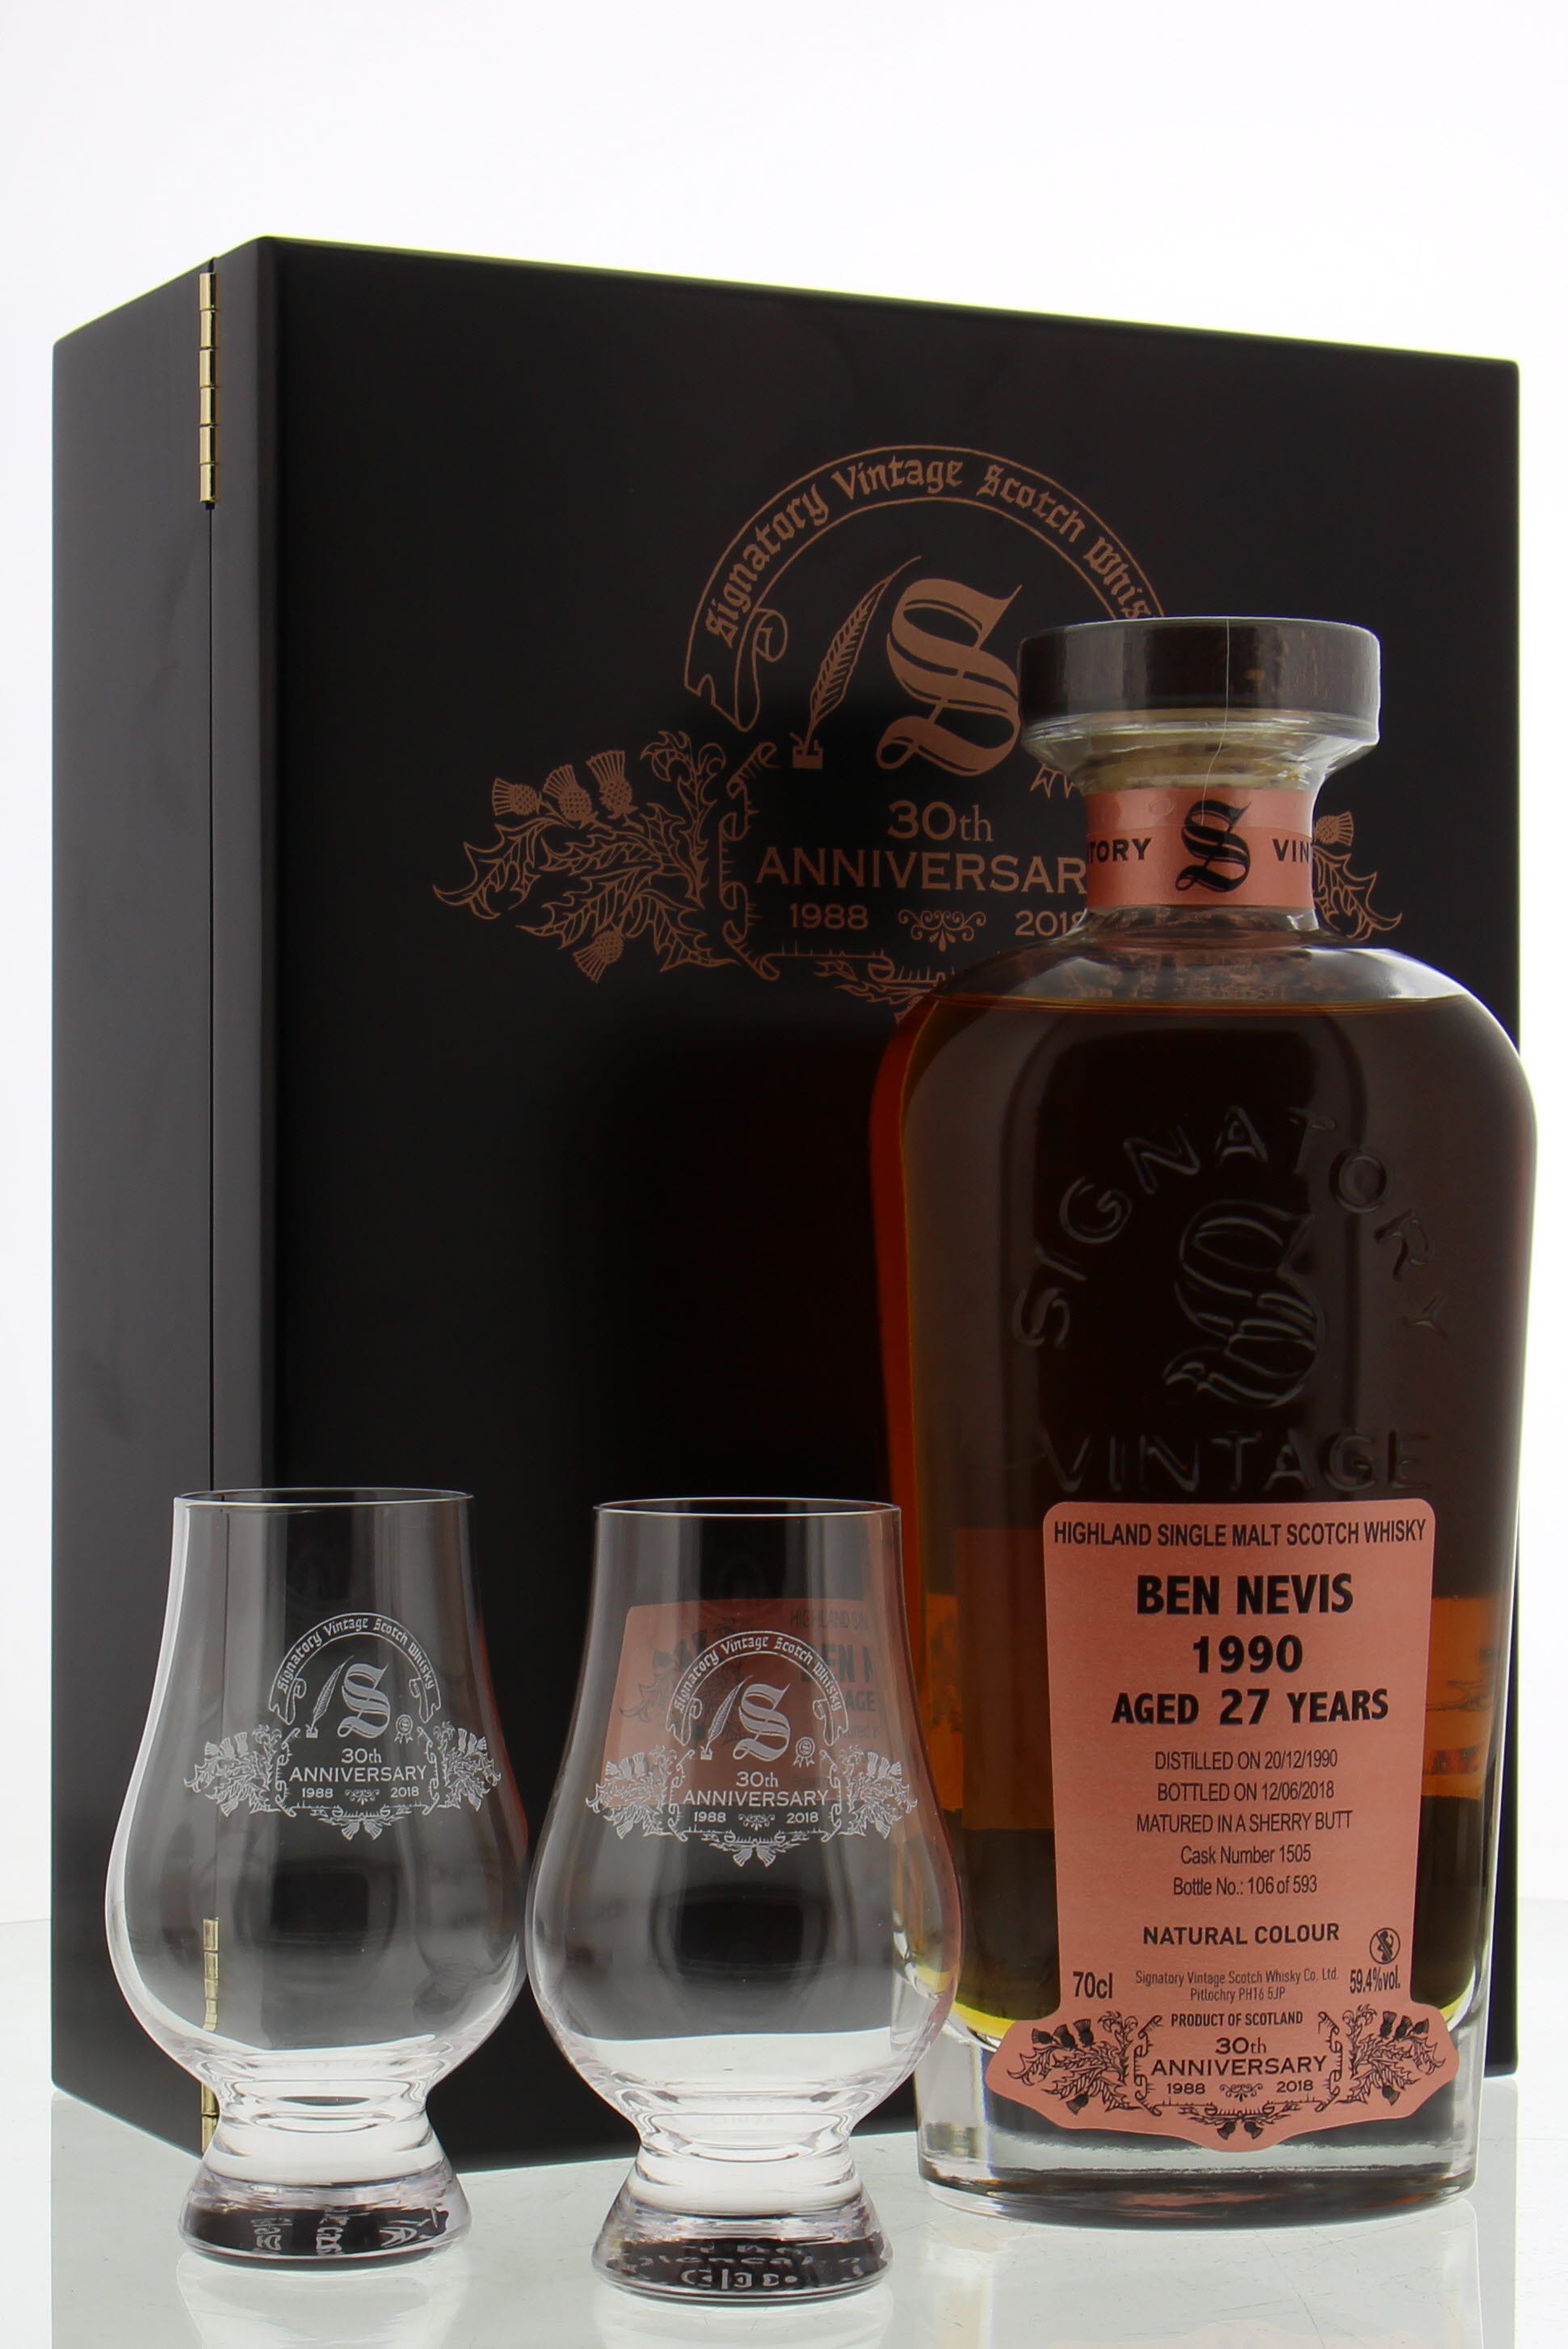 Ben Nevis - 27 Years Old Signatory 30th Anniversary Cask 1505 59.4% 1990 In Original Wooden Container